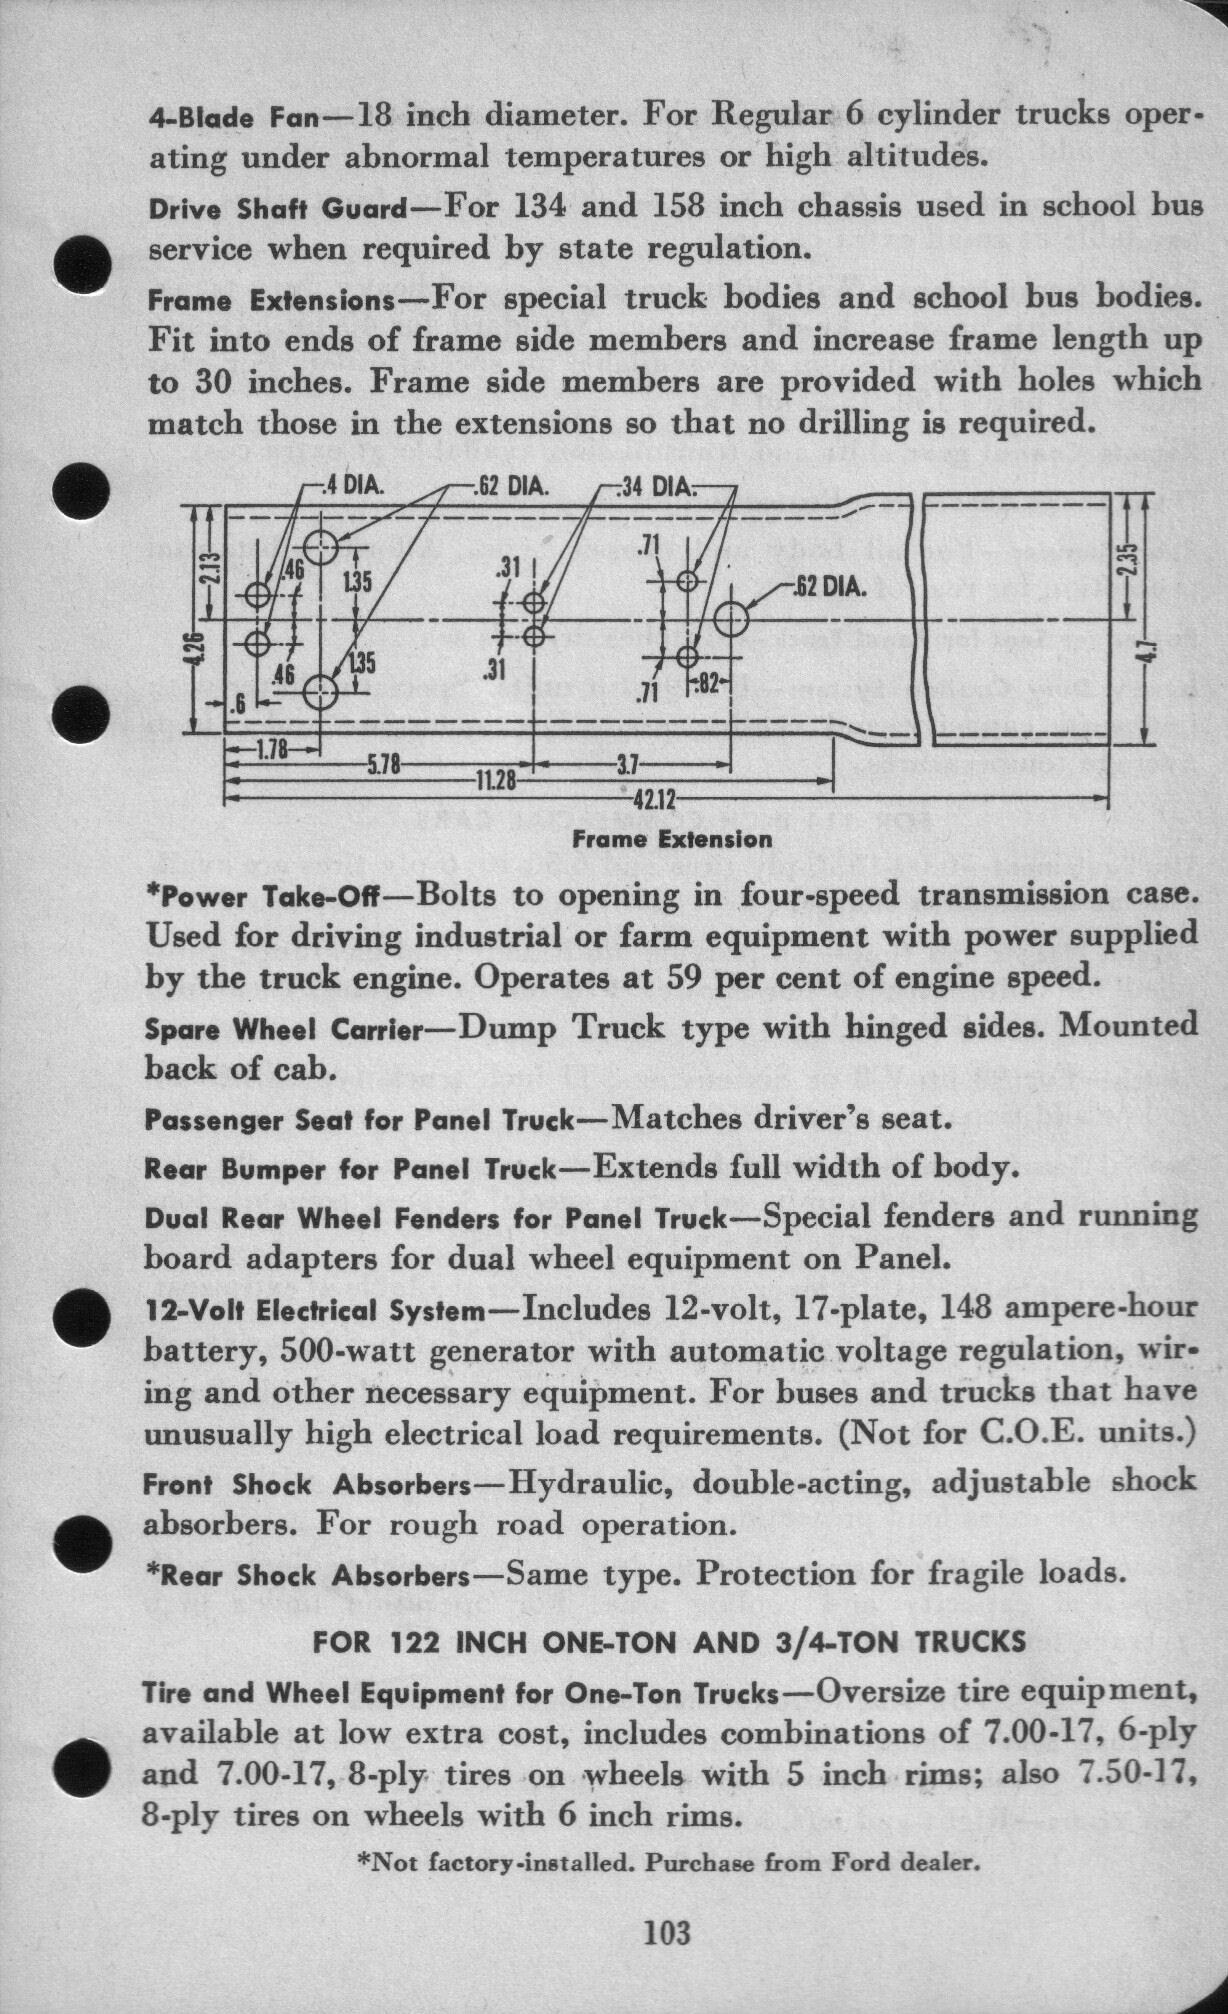 1942_Ford_Salesmans_Reference_Manual-103